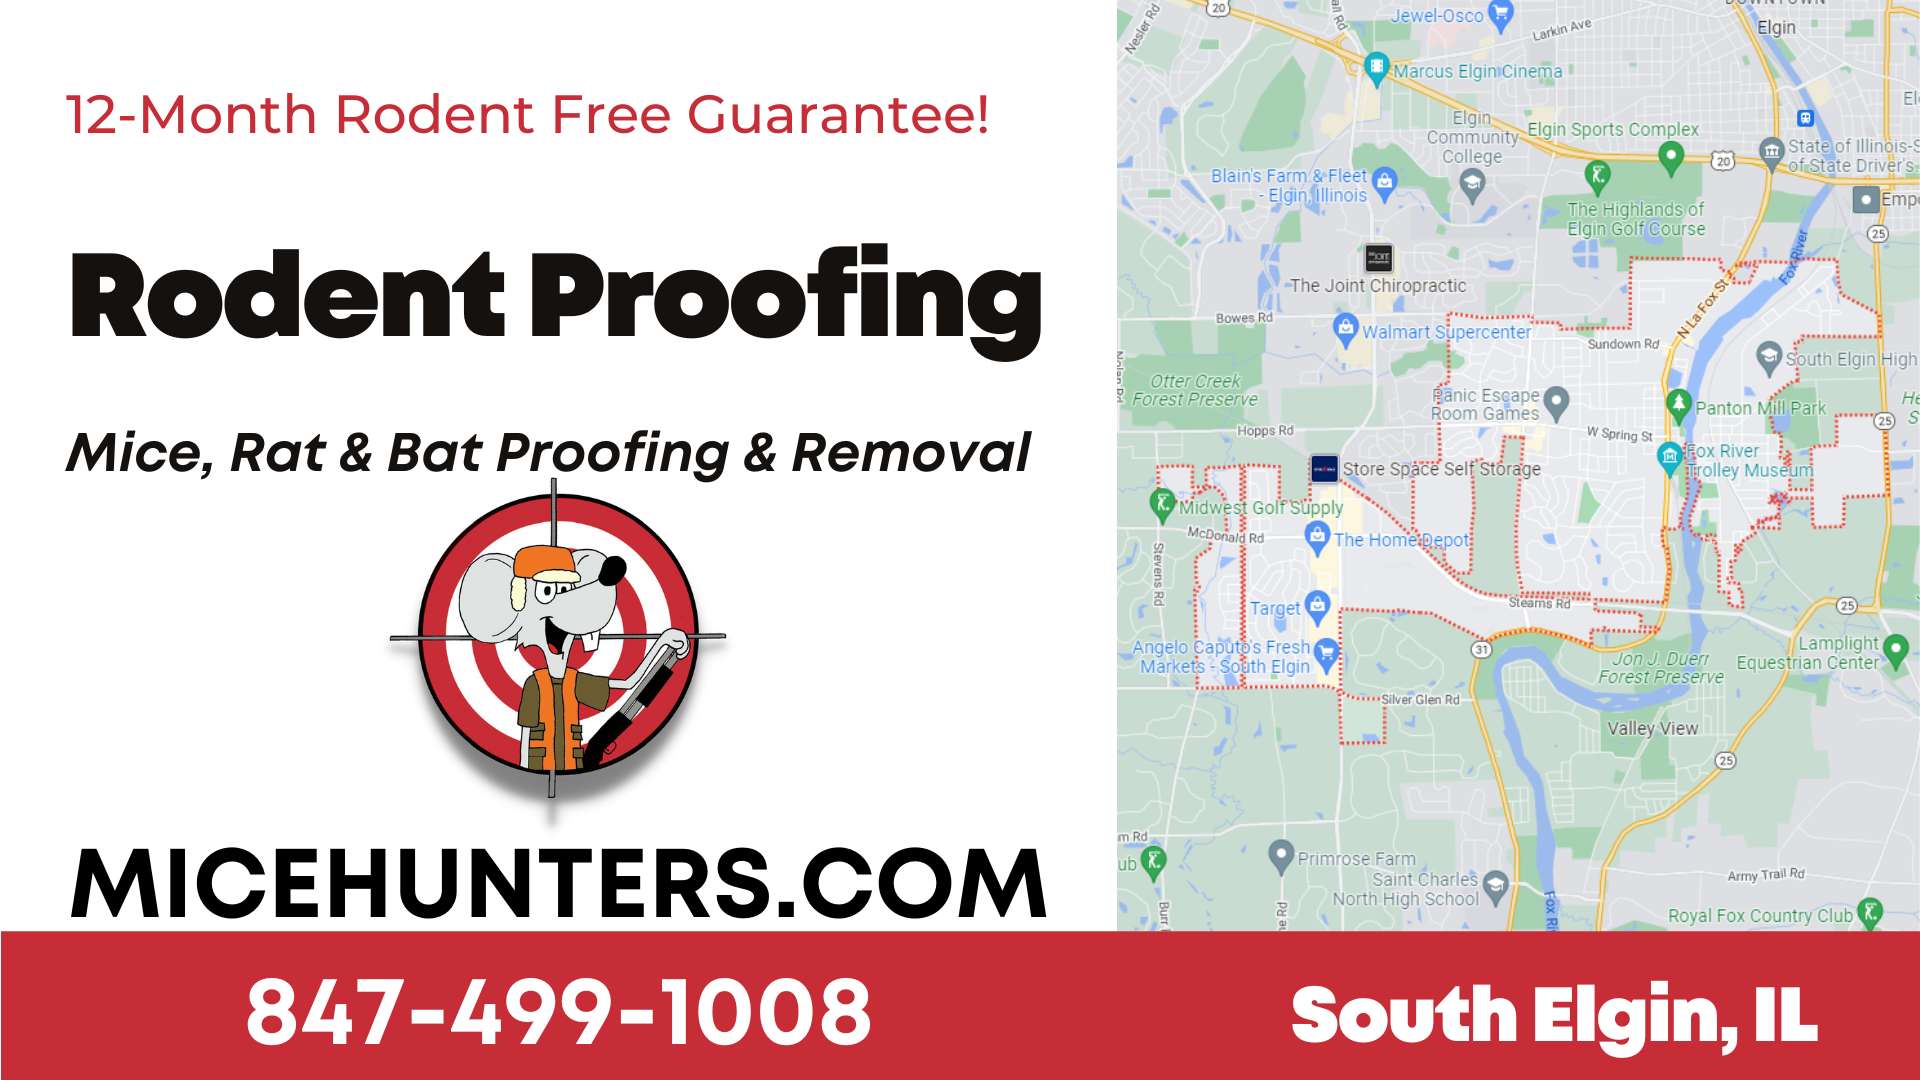 South Elgin Mice - Bat - Rat Removal Proofing Service